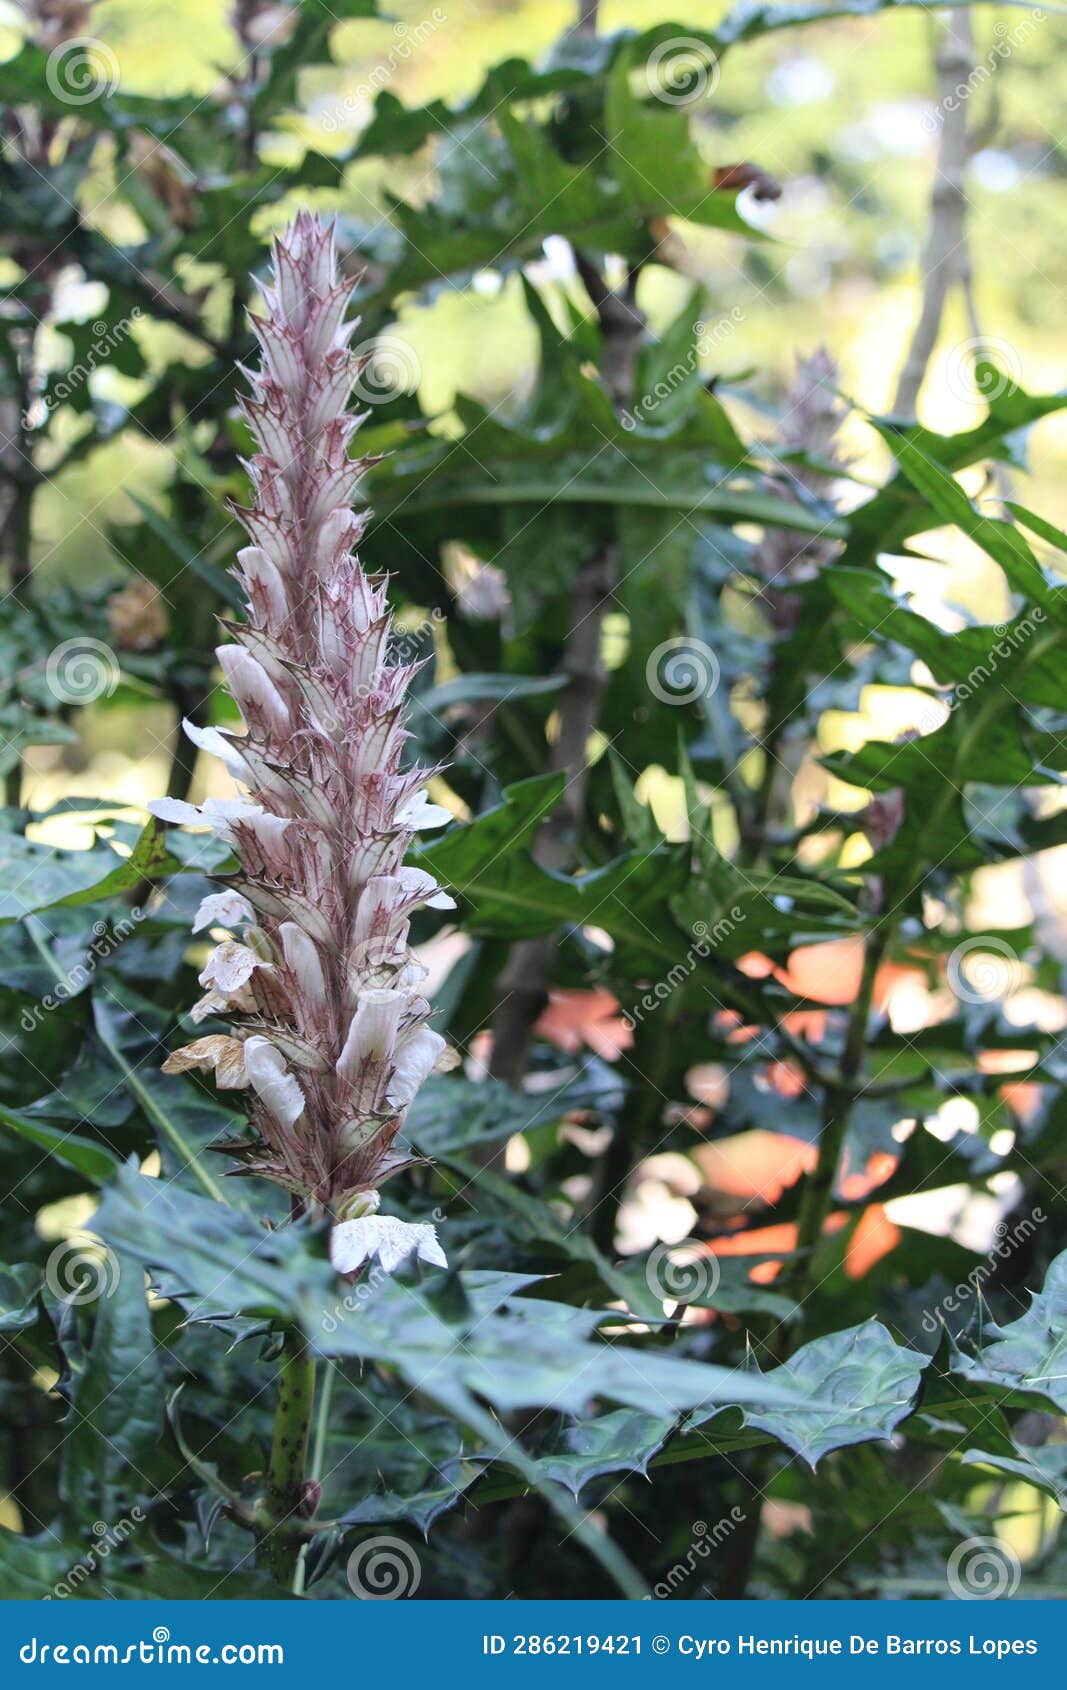 mountain thistle details photo, bear's breech, acanthus montanus, african species, introduced ornamental species